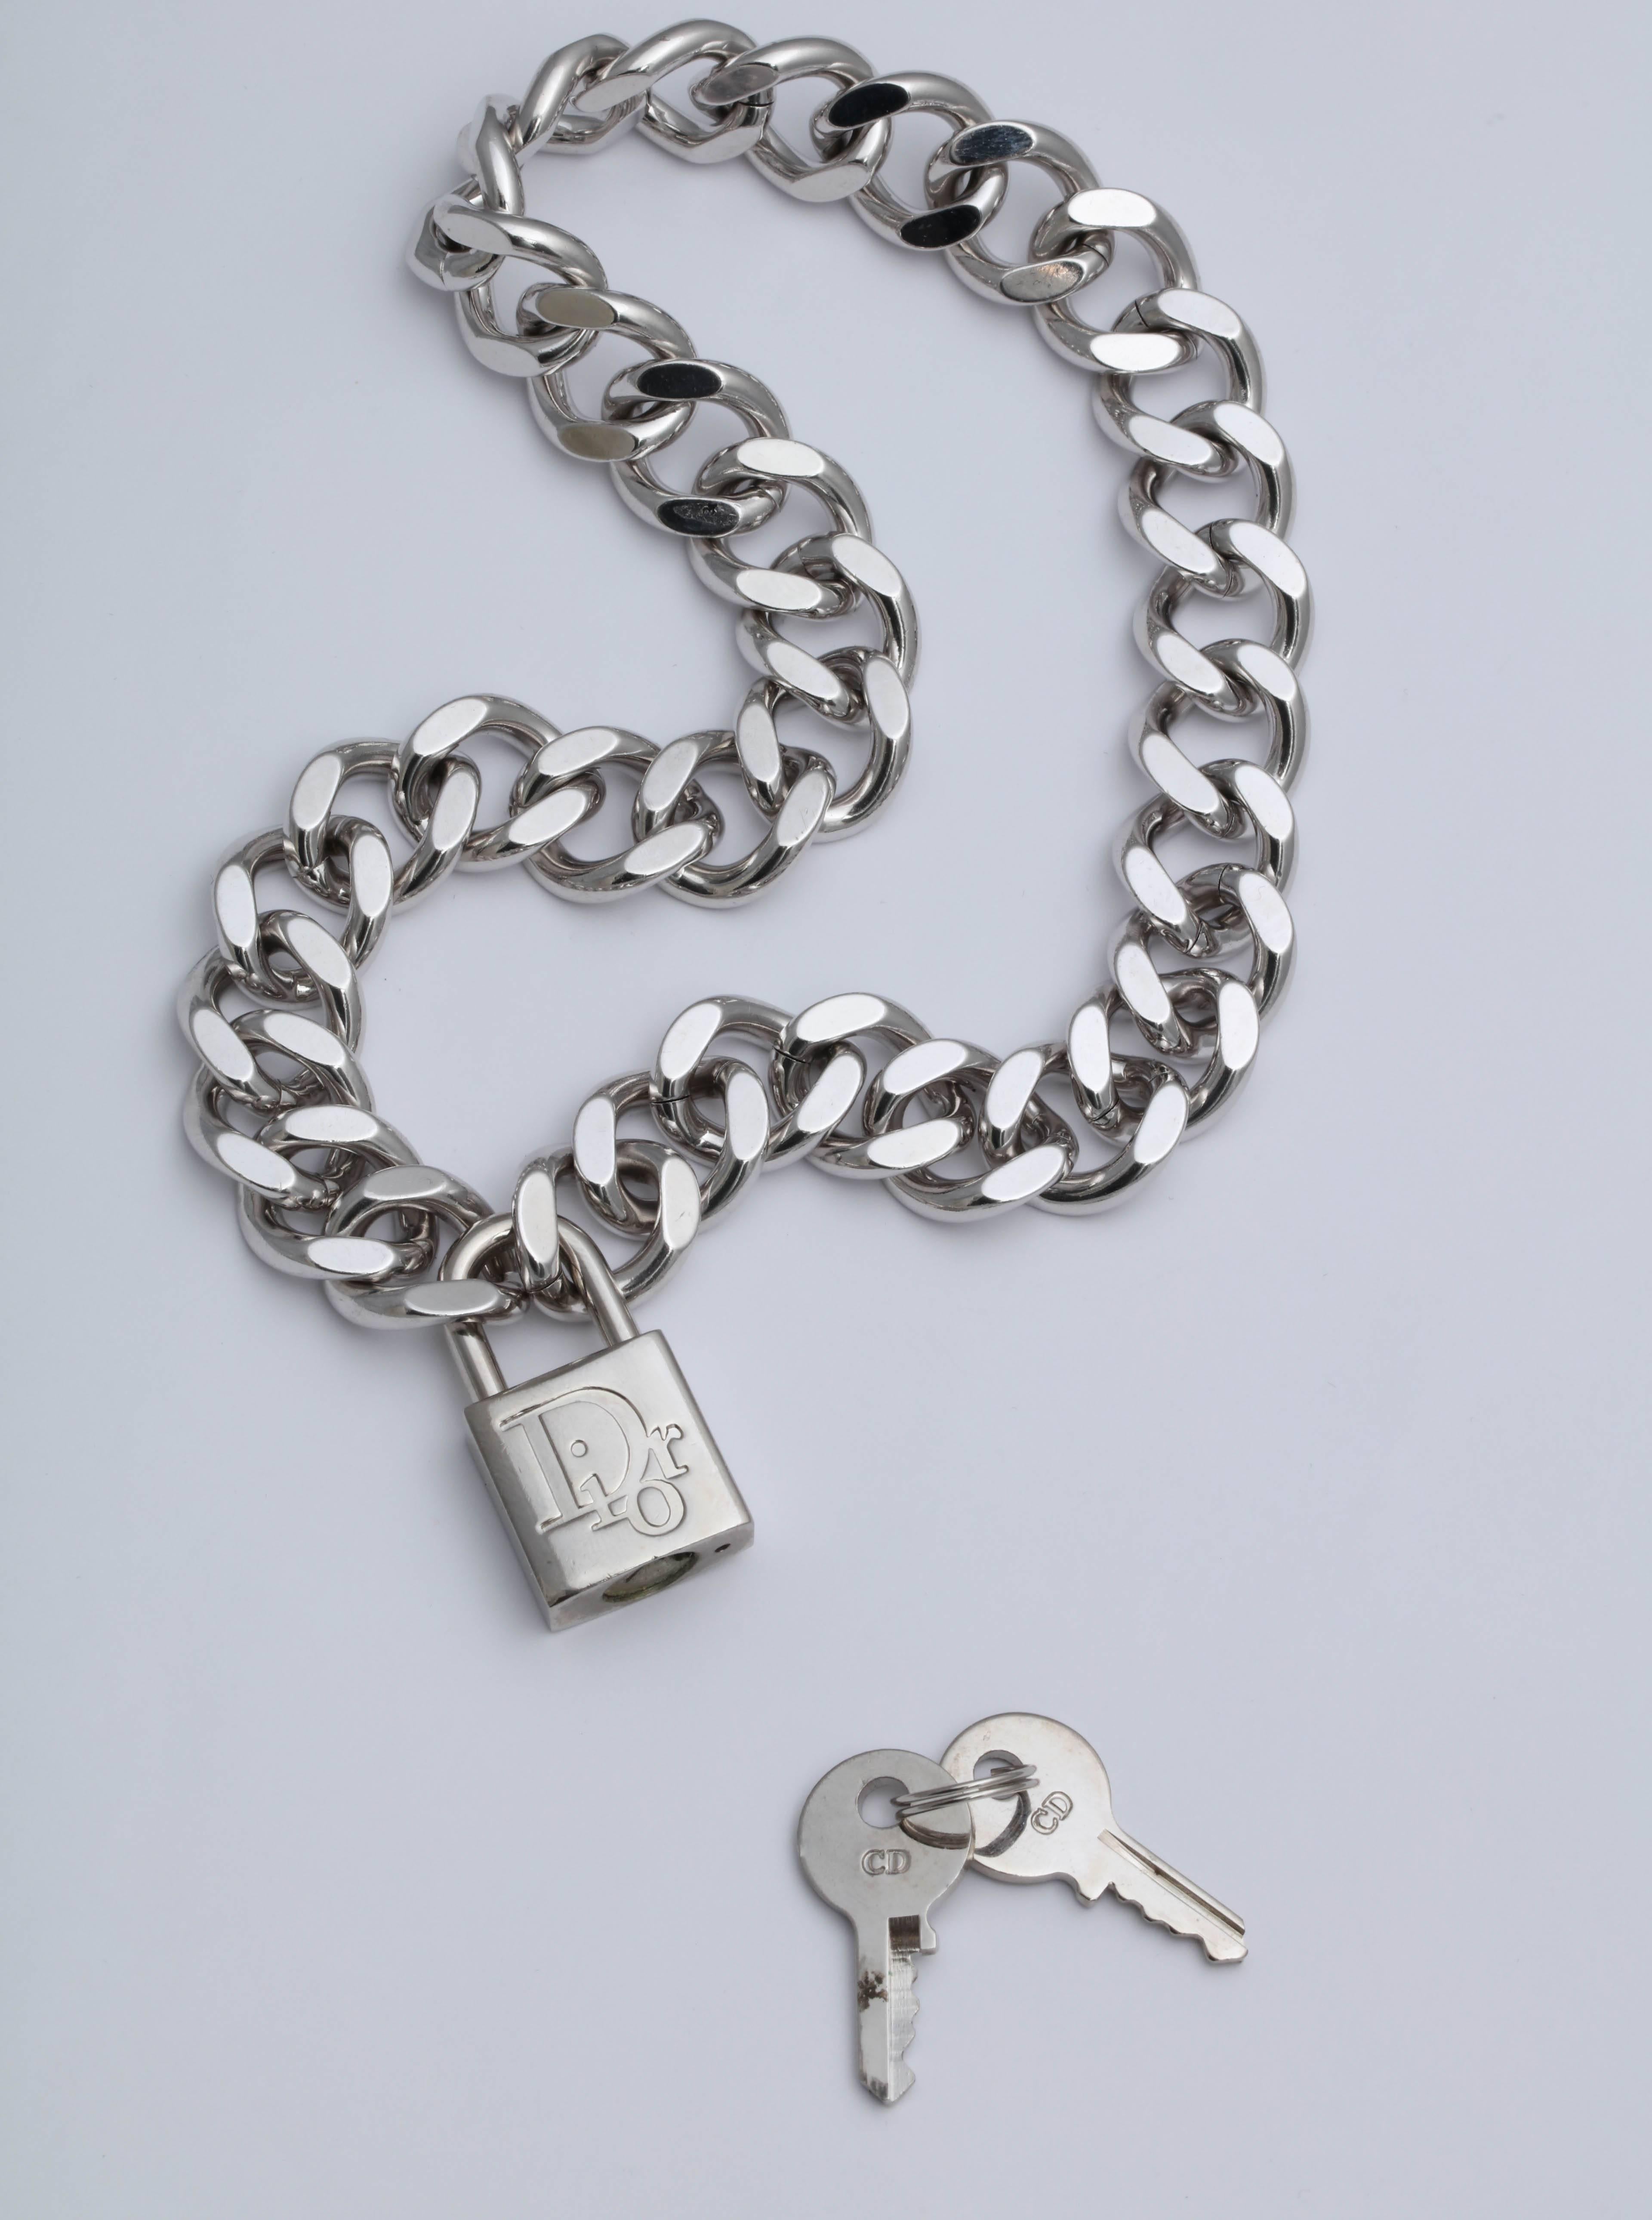 Christian Dior padlock necklace with logos. Comes with keys. The color is silver. From Galliano era. 